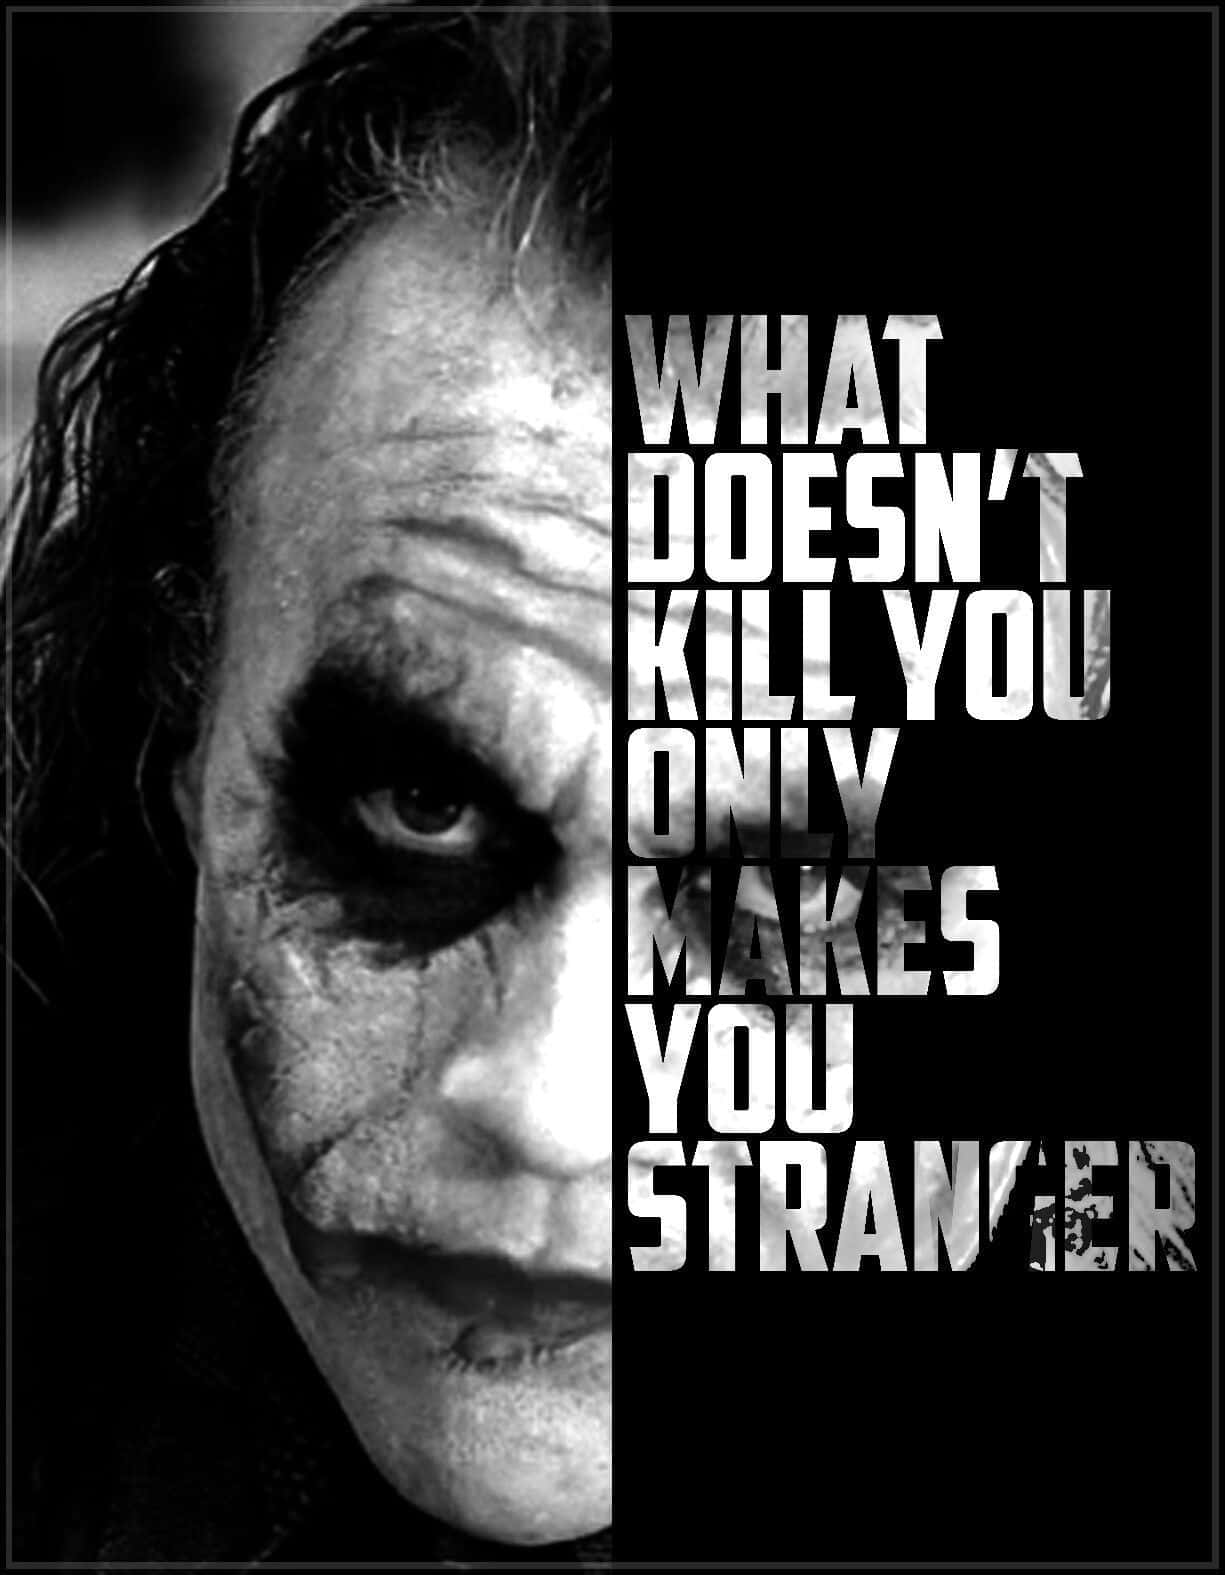 Joker Quotes - A Smile That Hides The Darkness Wallpaper